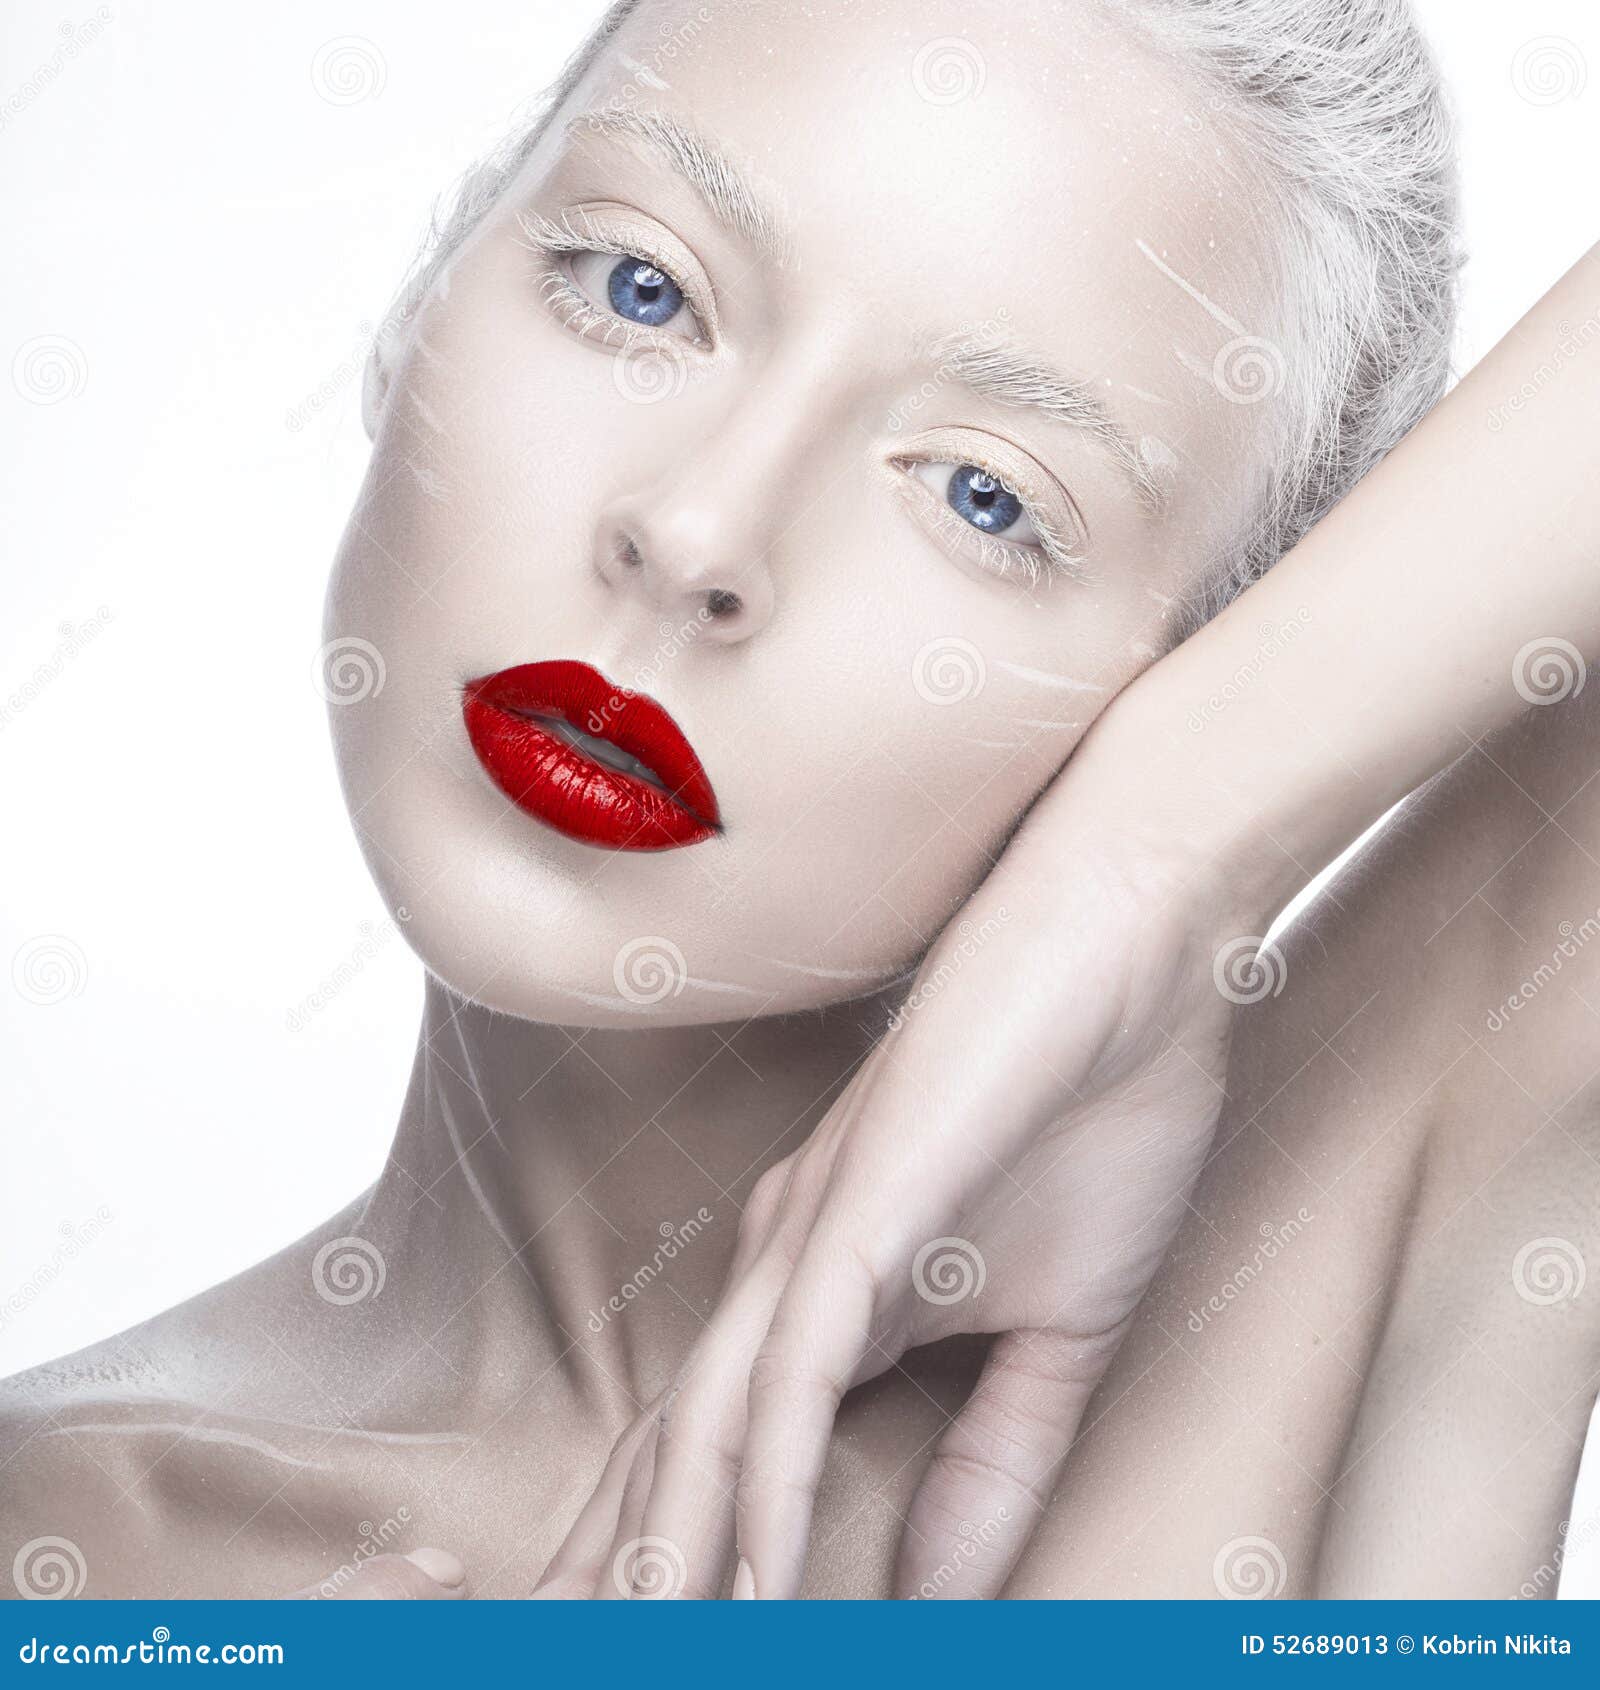 Beautiful Girl In The Image Of Albino With Red Lips And White Eyes Art Beauty Face Stock Photo Megapixl